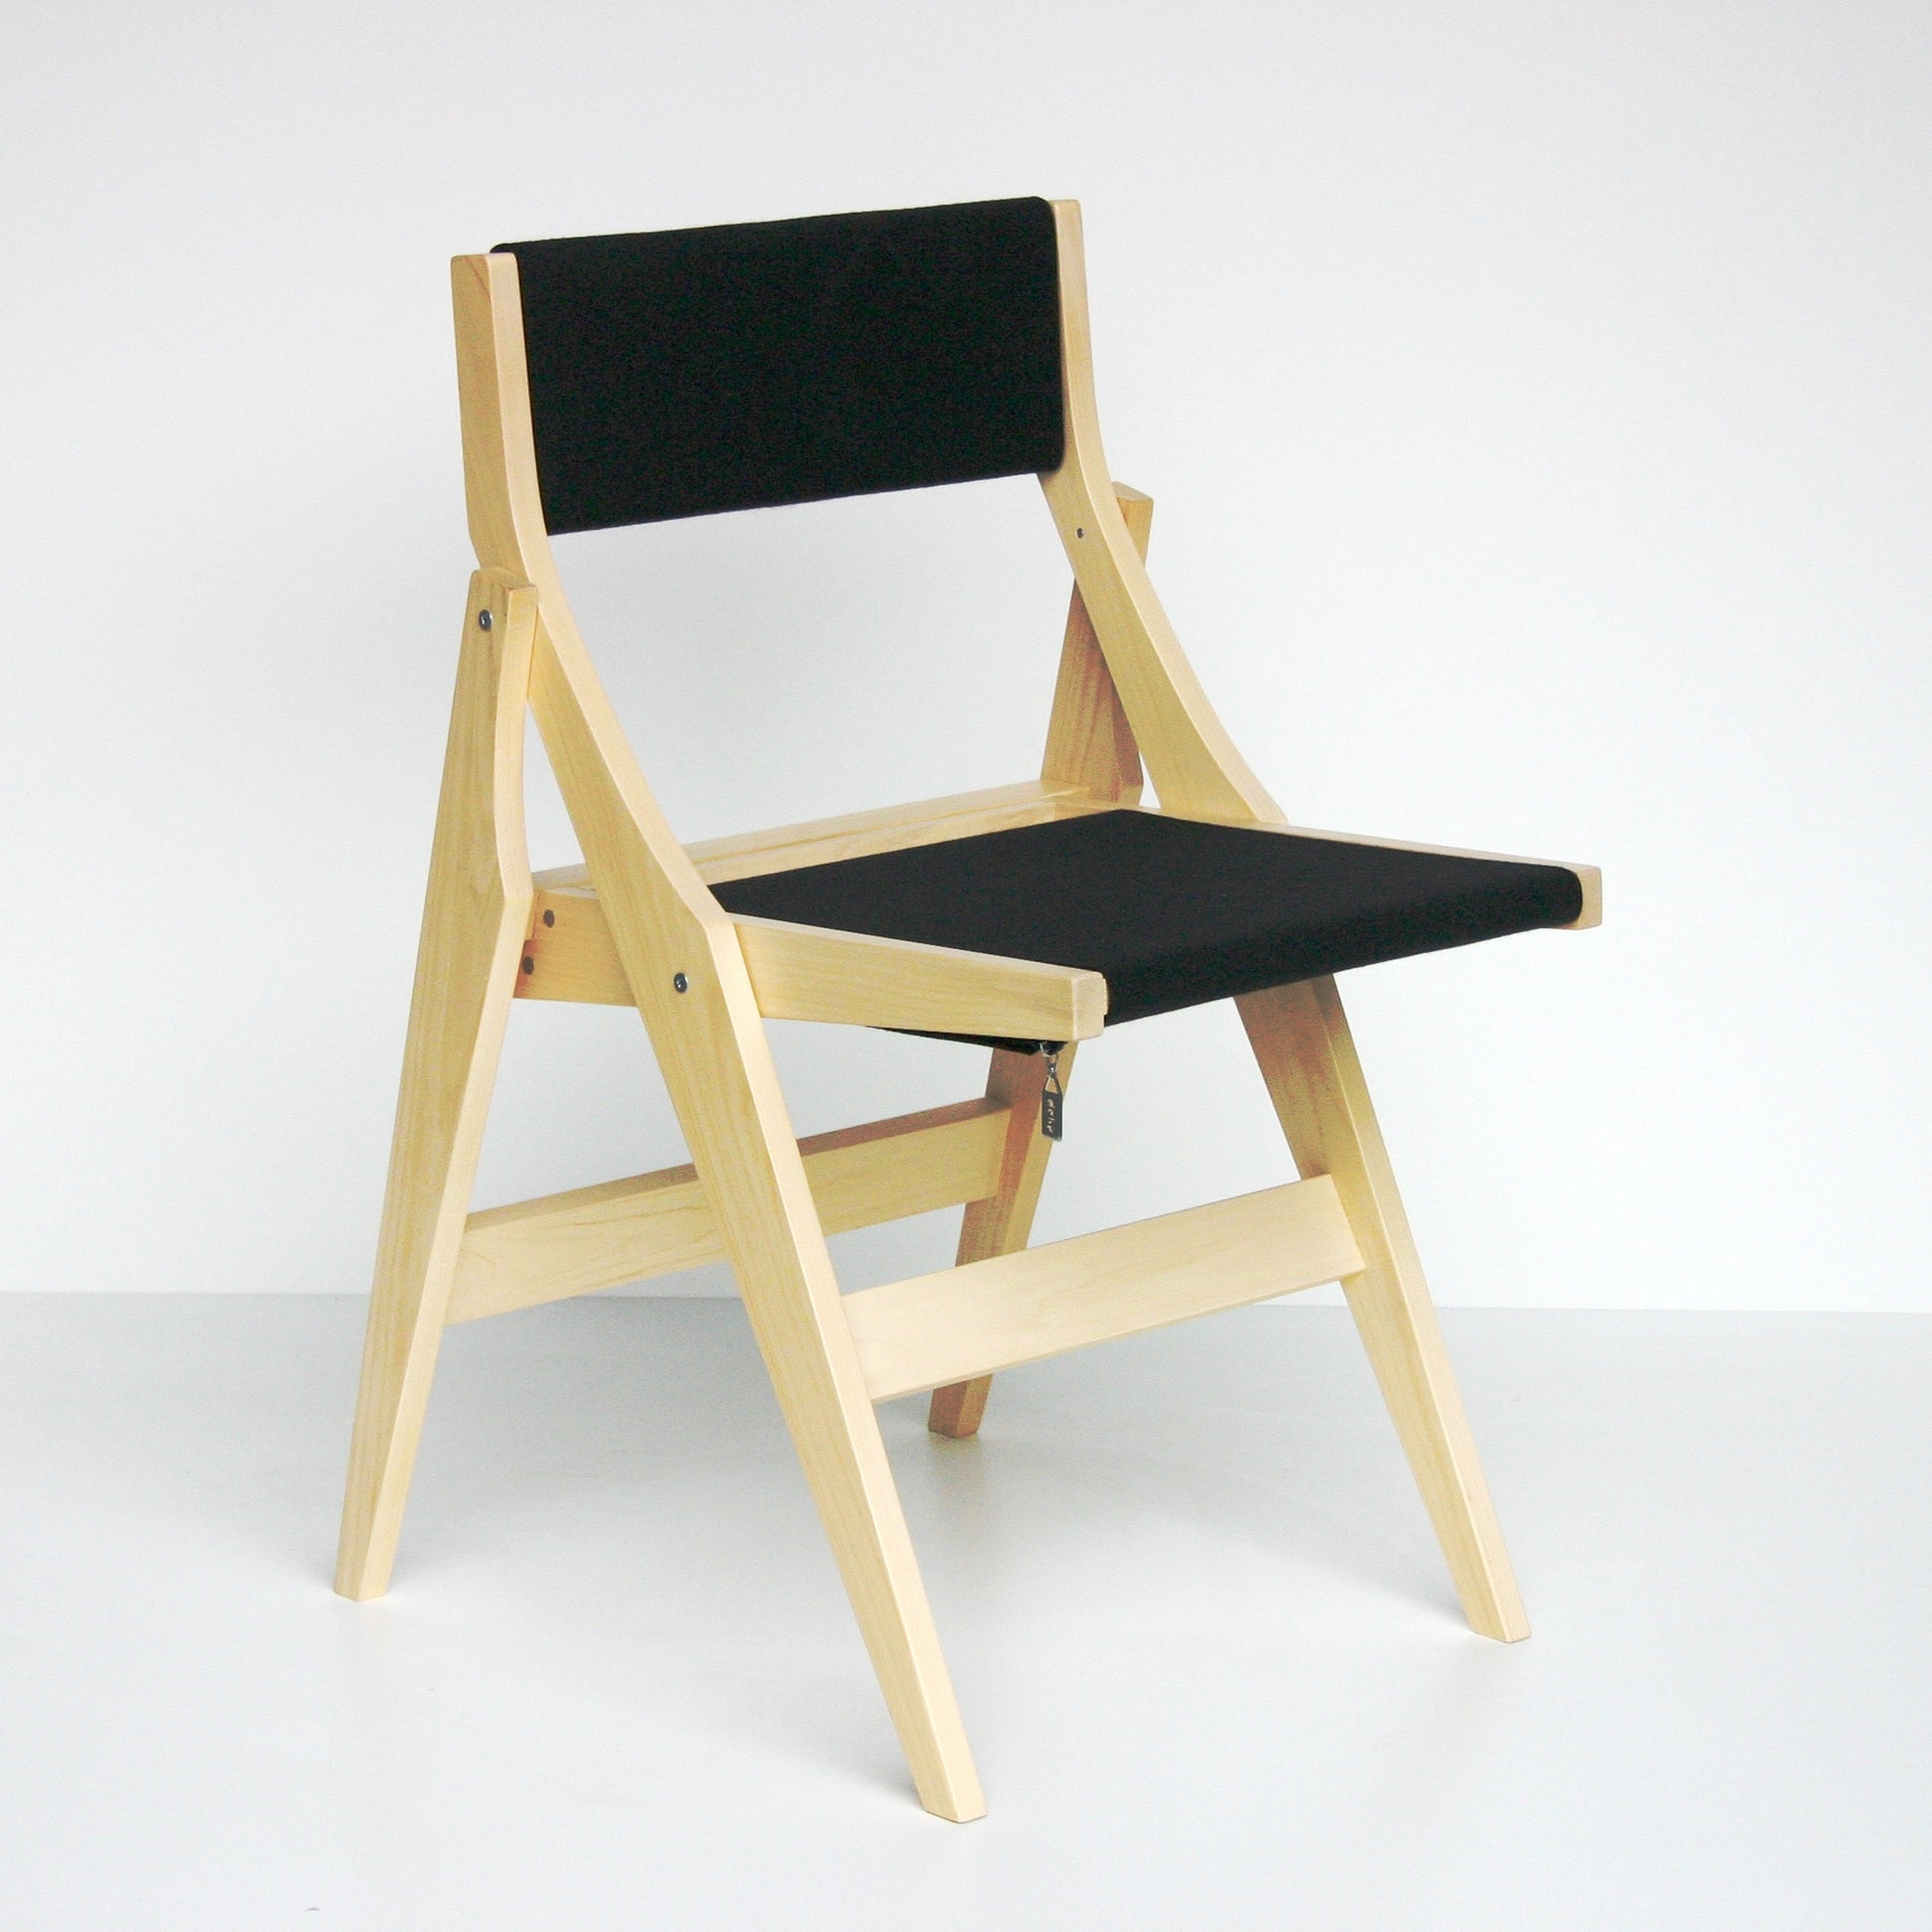 trans-form-it dining chair by Deka